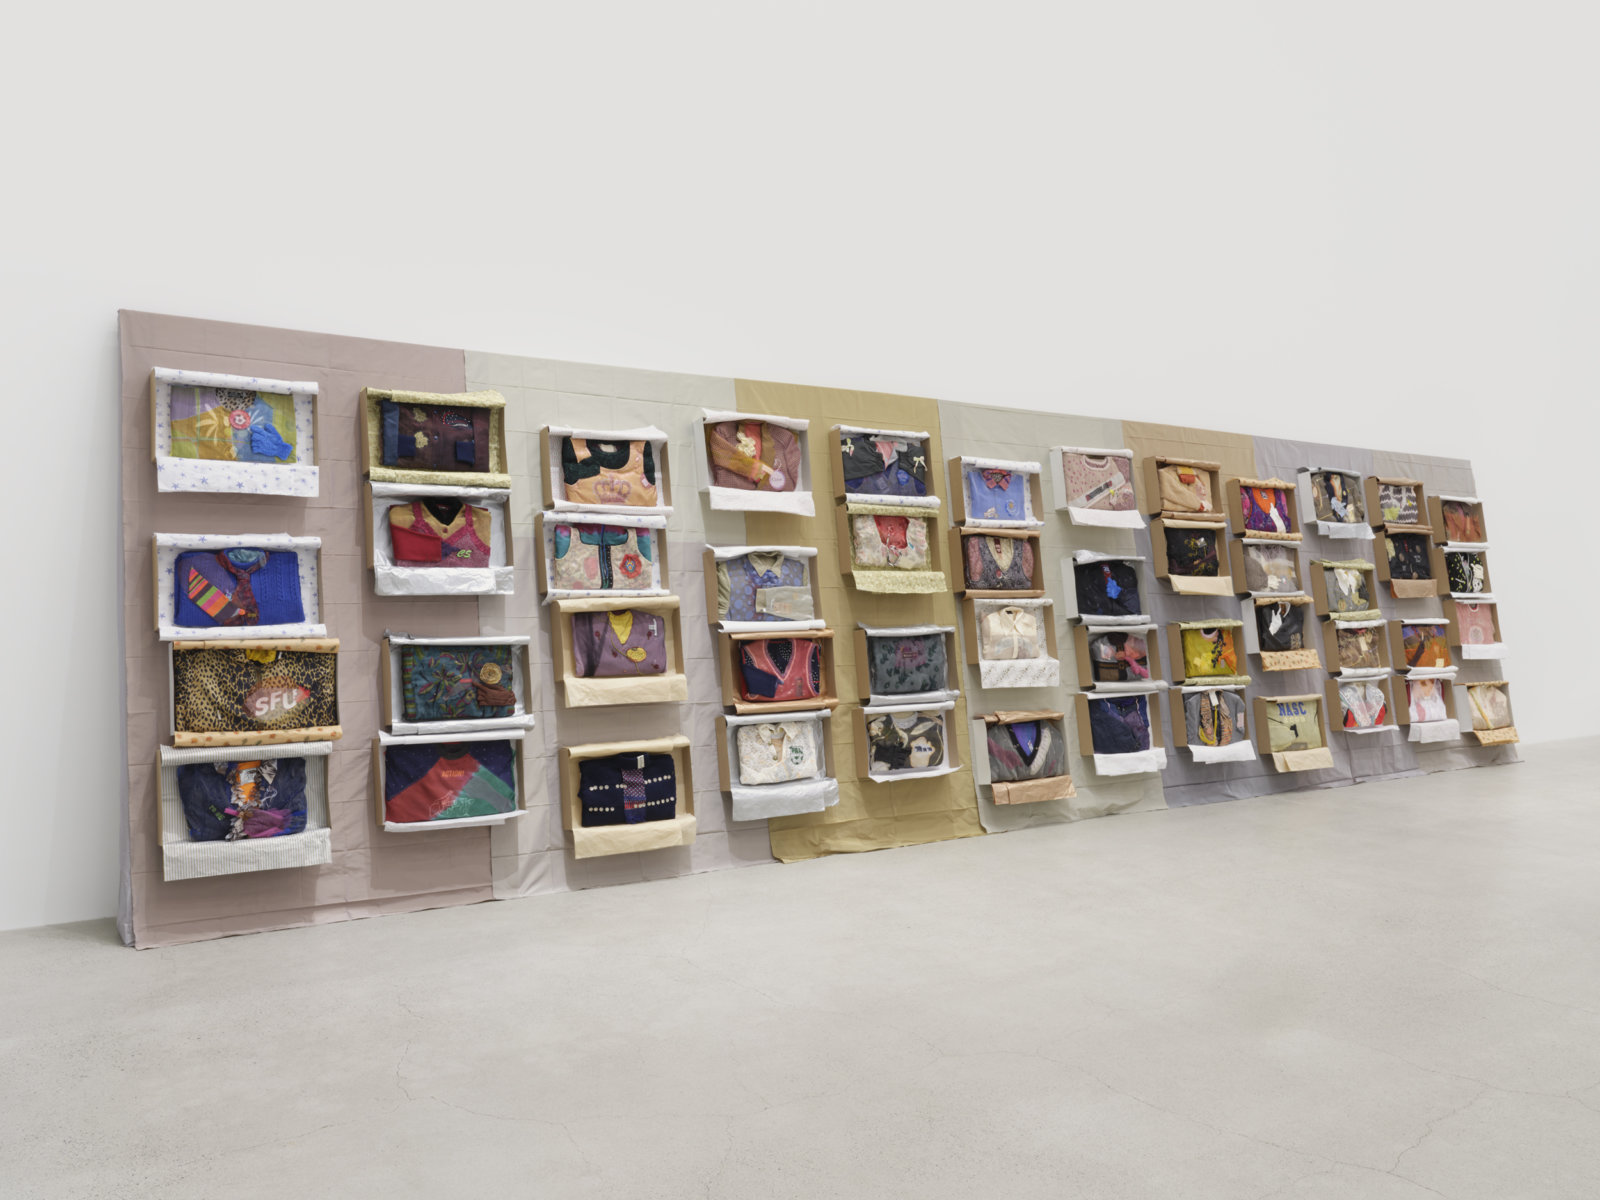 Liz Magor, Being This, 2012/2022, paper, textiles, found materials, 96 x 432 x 22 in. (244 x 1097 x 56 cm)